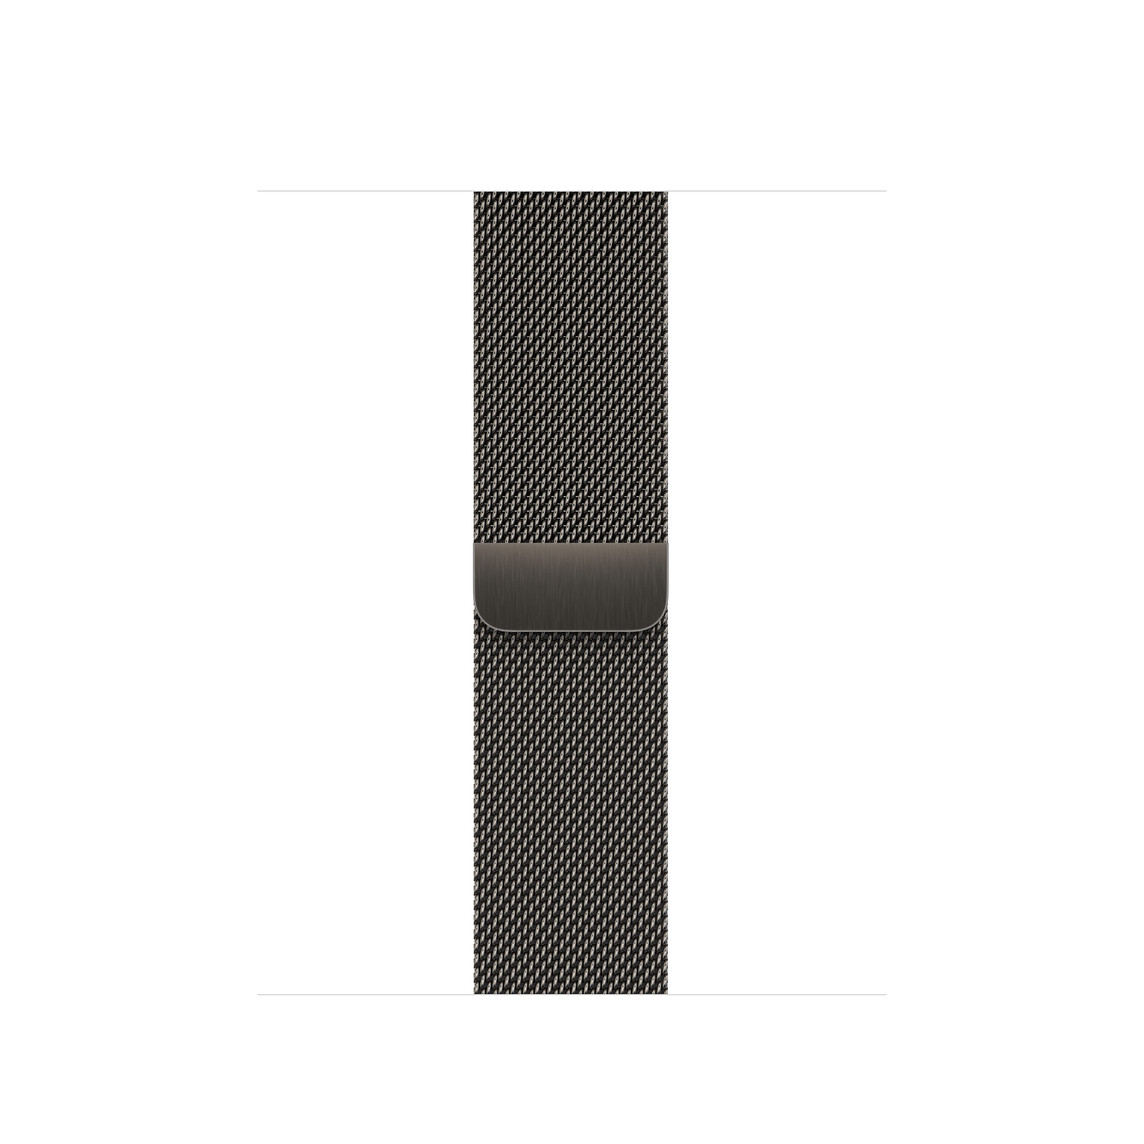 Graphite (dark gray) Milanese Loop band, polished stainless steel mesh with magnetic closure